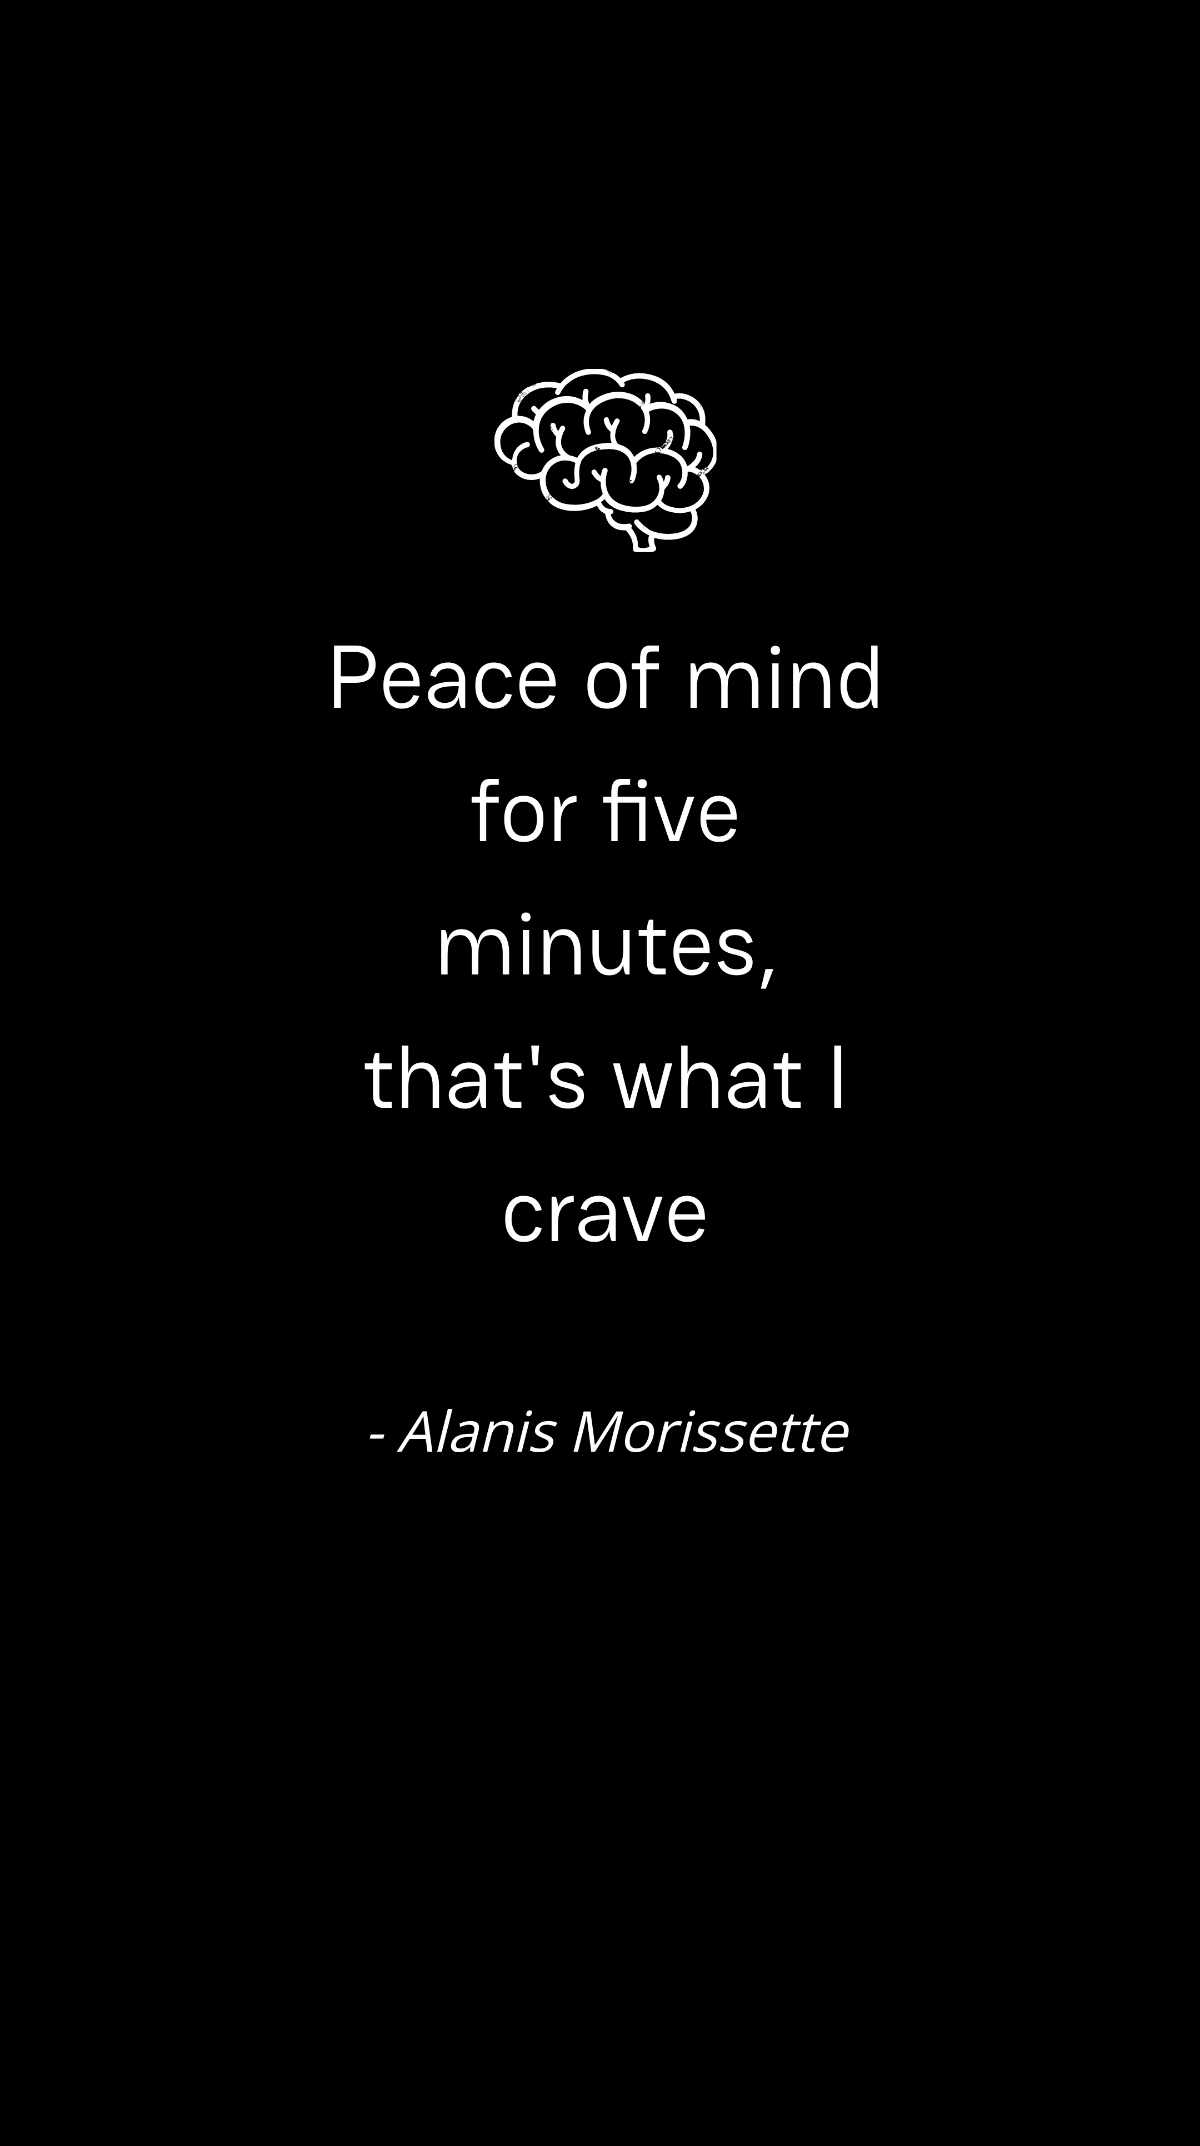 Free Alanis Morissette - Peace of mind for five minutes, that's what I crave Template